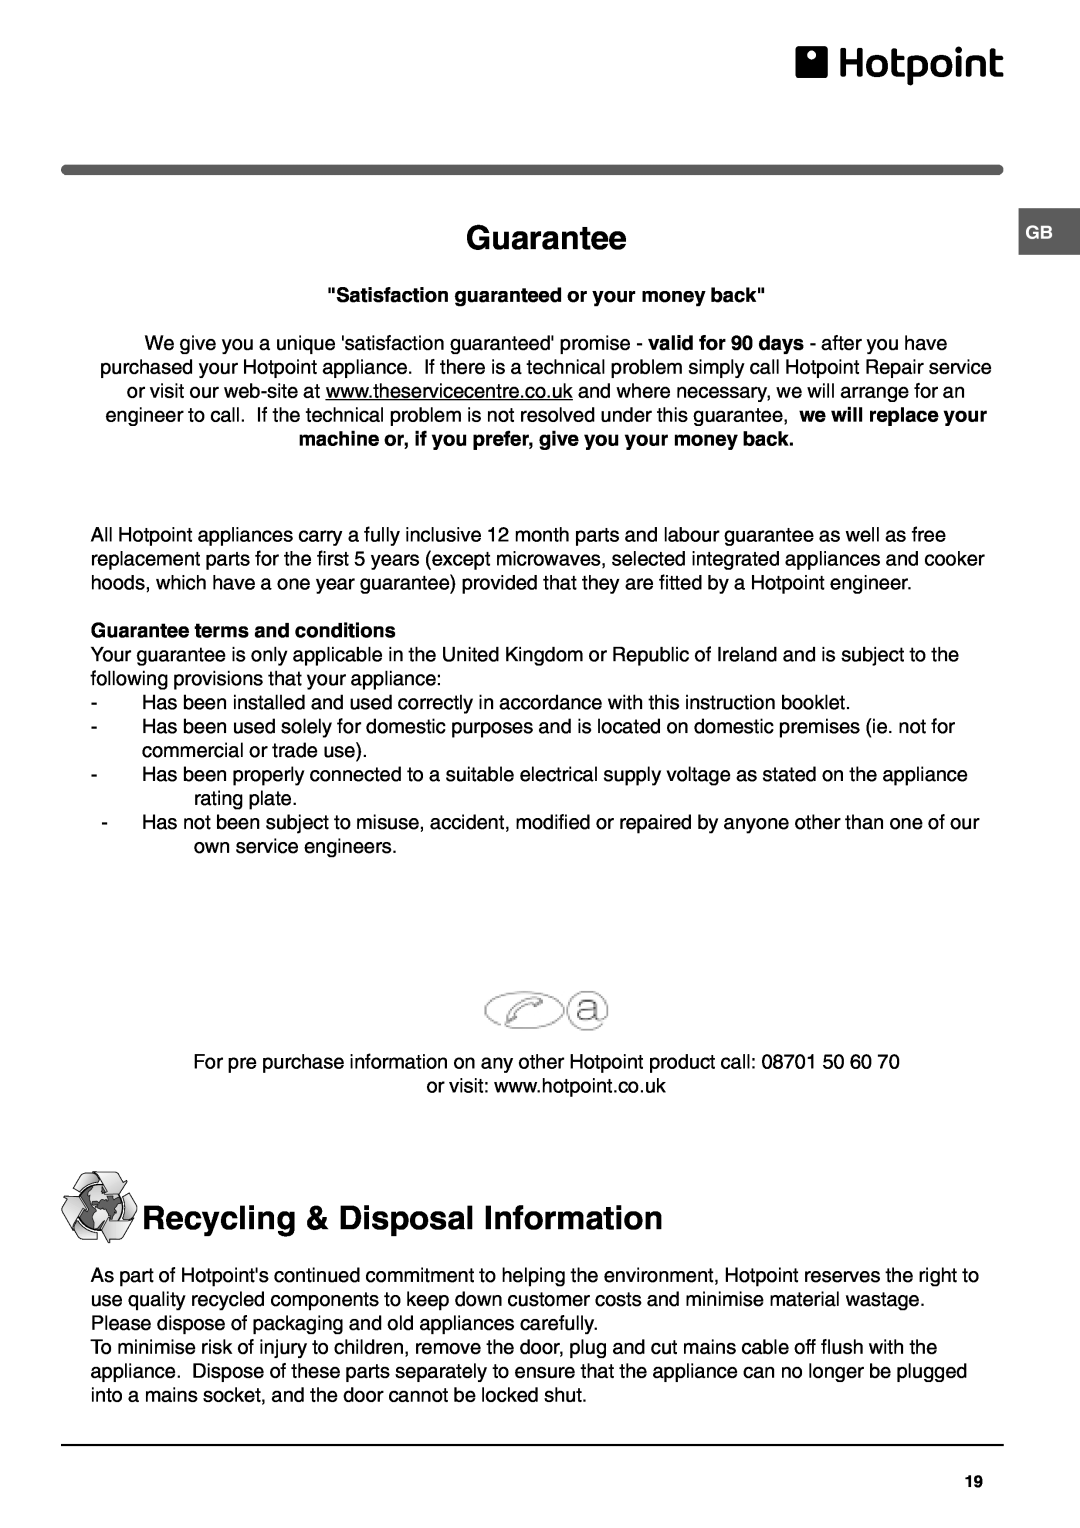 Hotpoint FFL49 manual Guarantee, Recycling & Disposal Information, Satisfaction guaranteed or your money back 